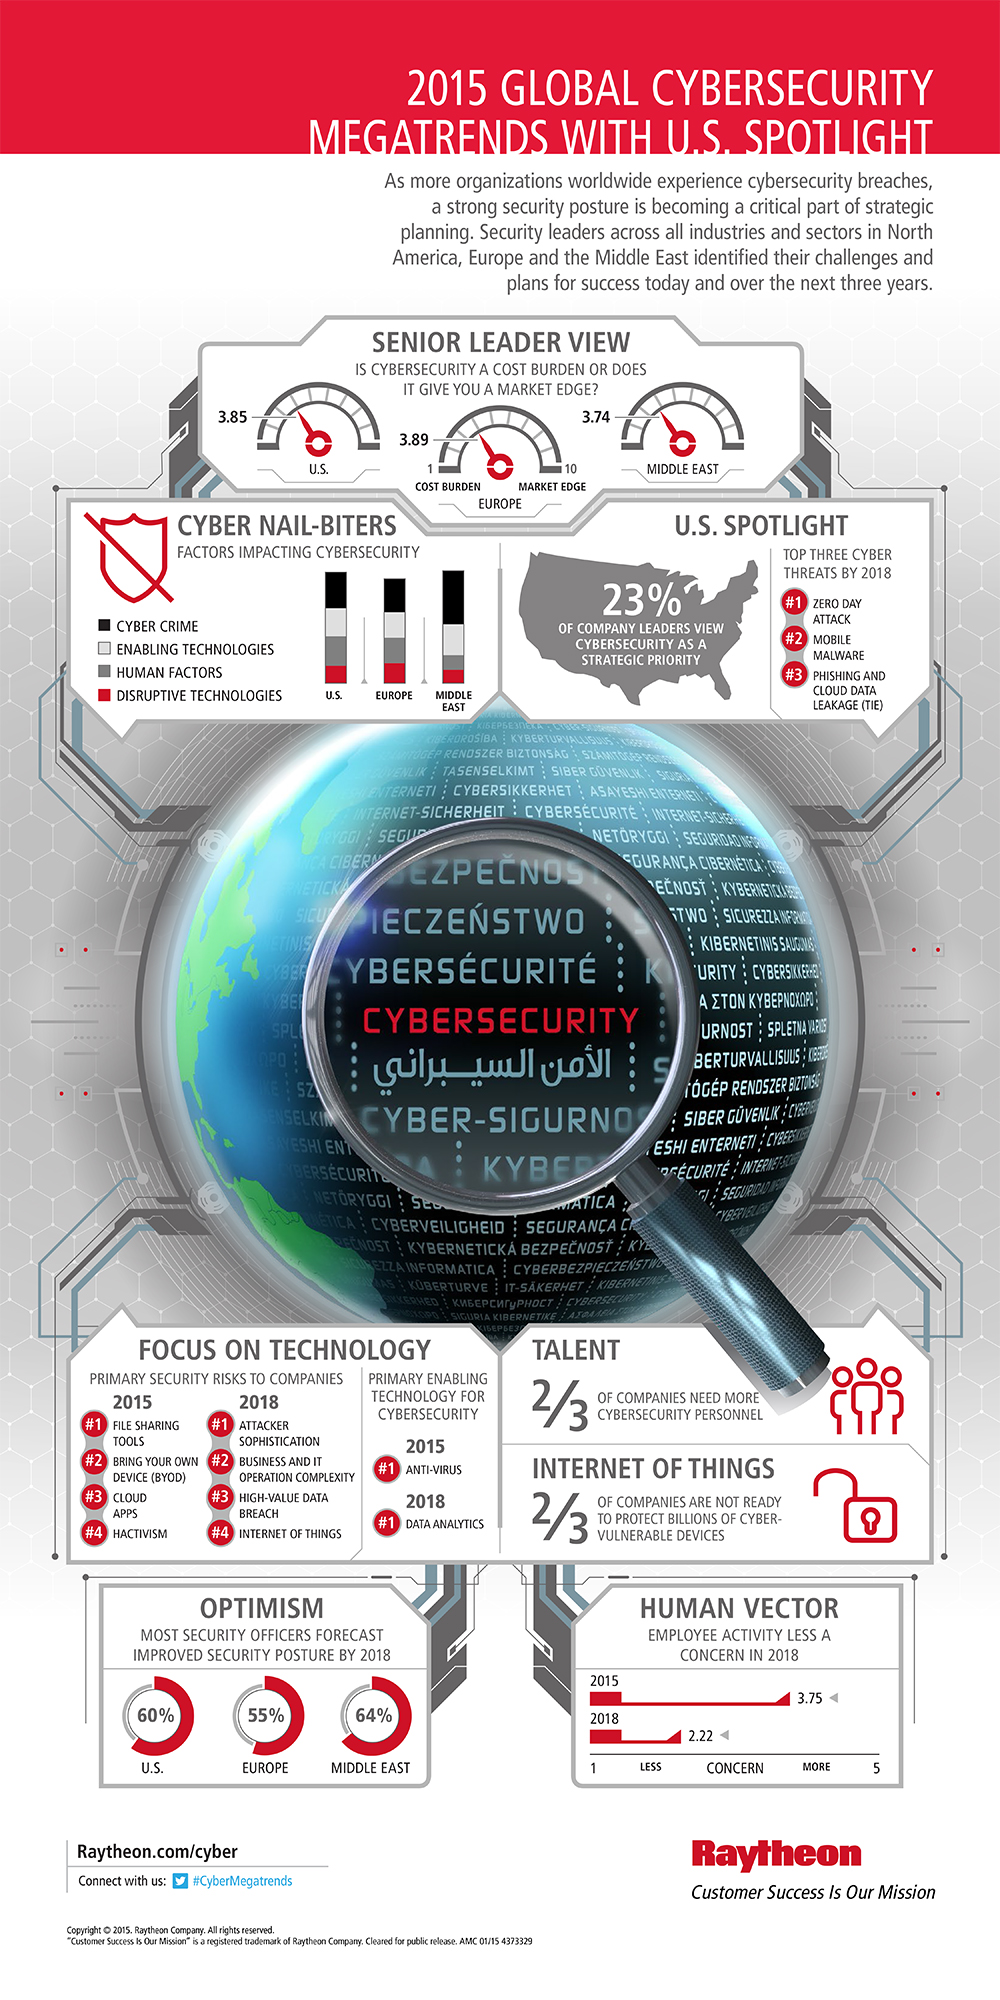 2015 Cyber Security Megatrends Infographic_US